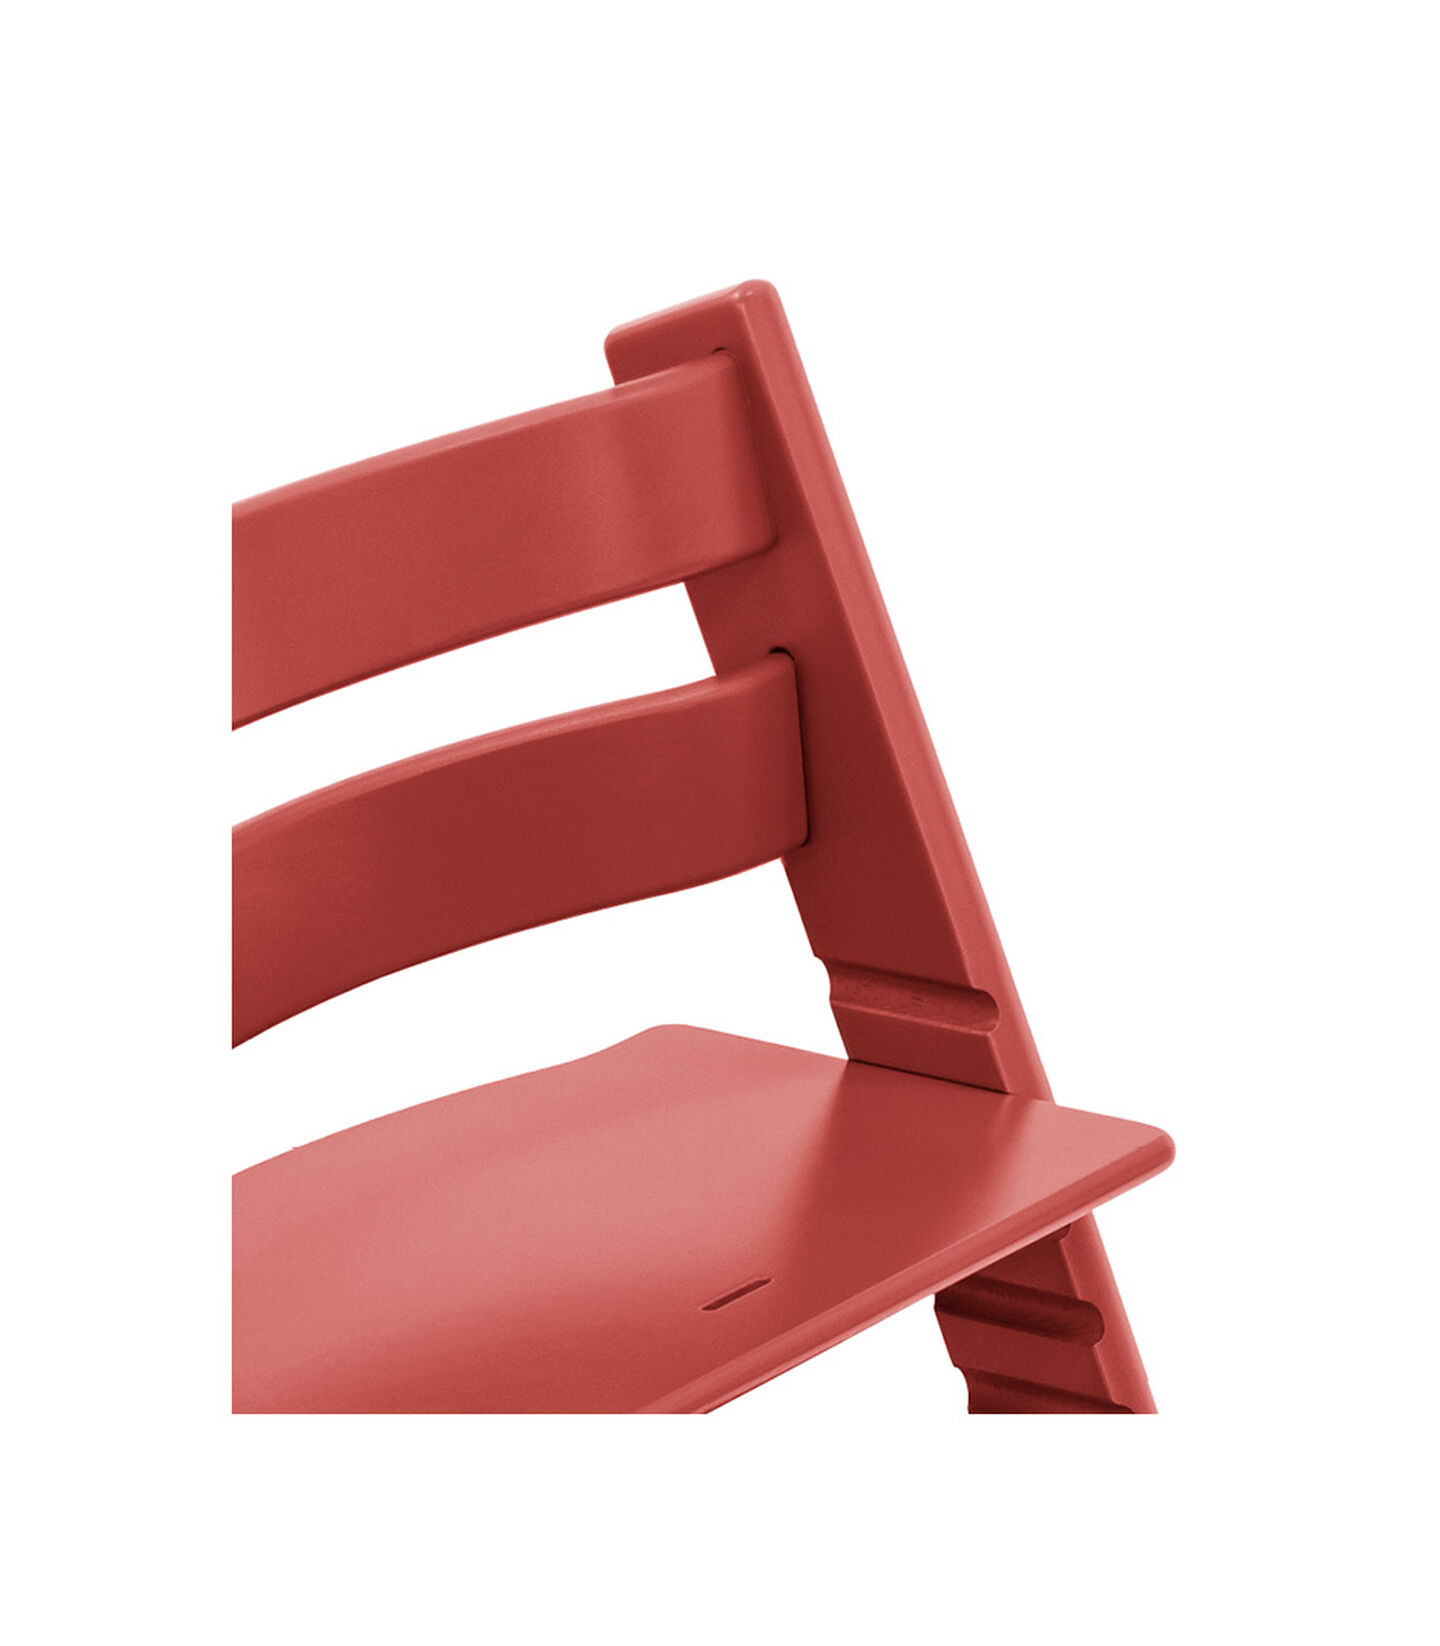 Tripp Trapp® Chair Warm Red, Warm Red, mainview view 3